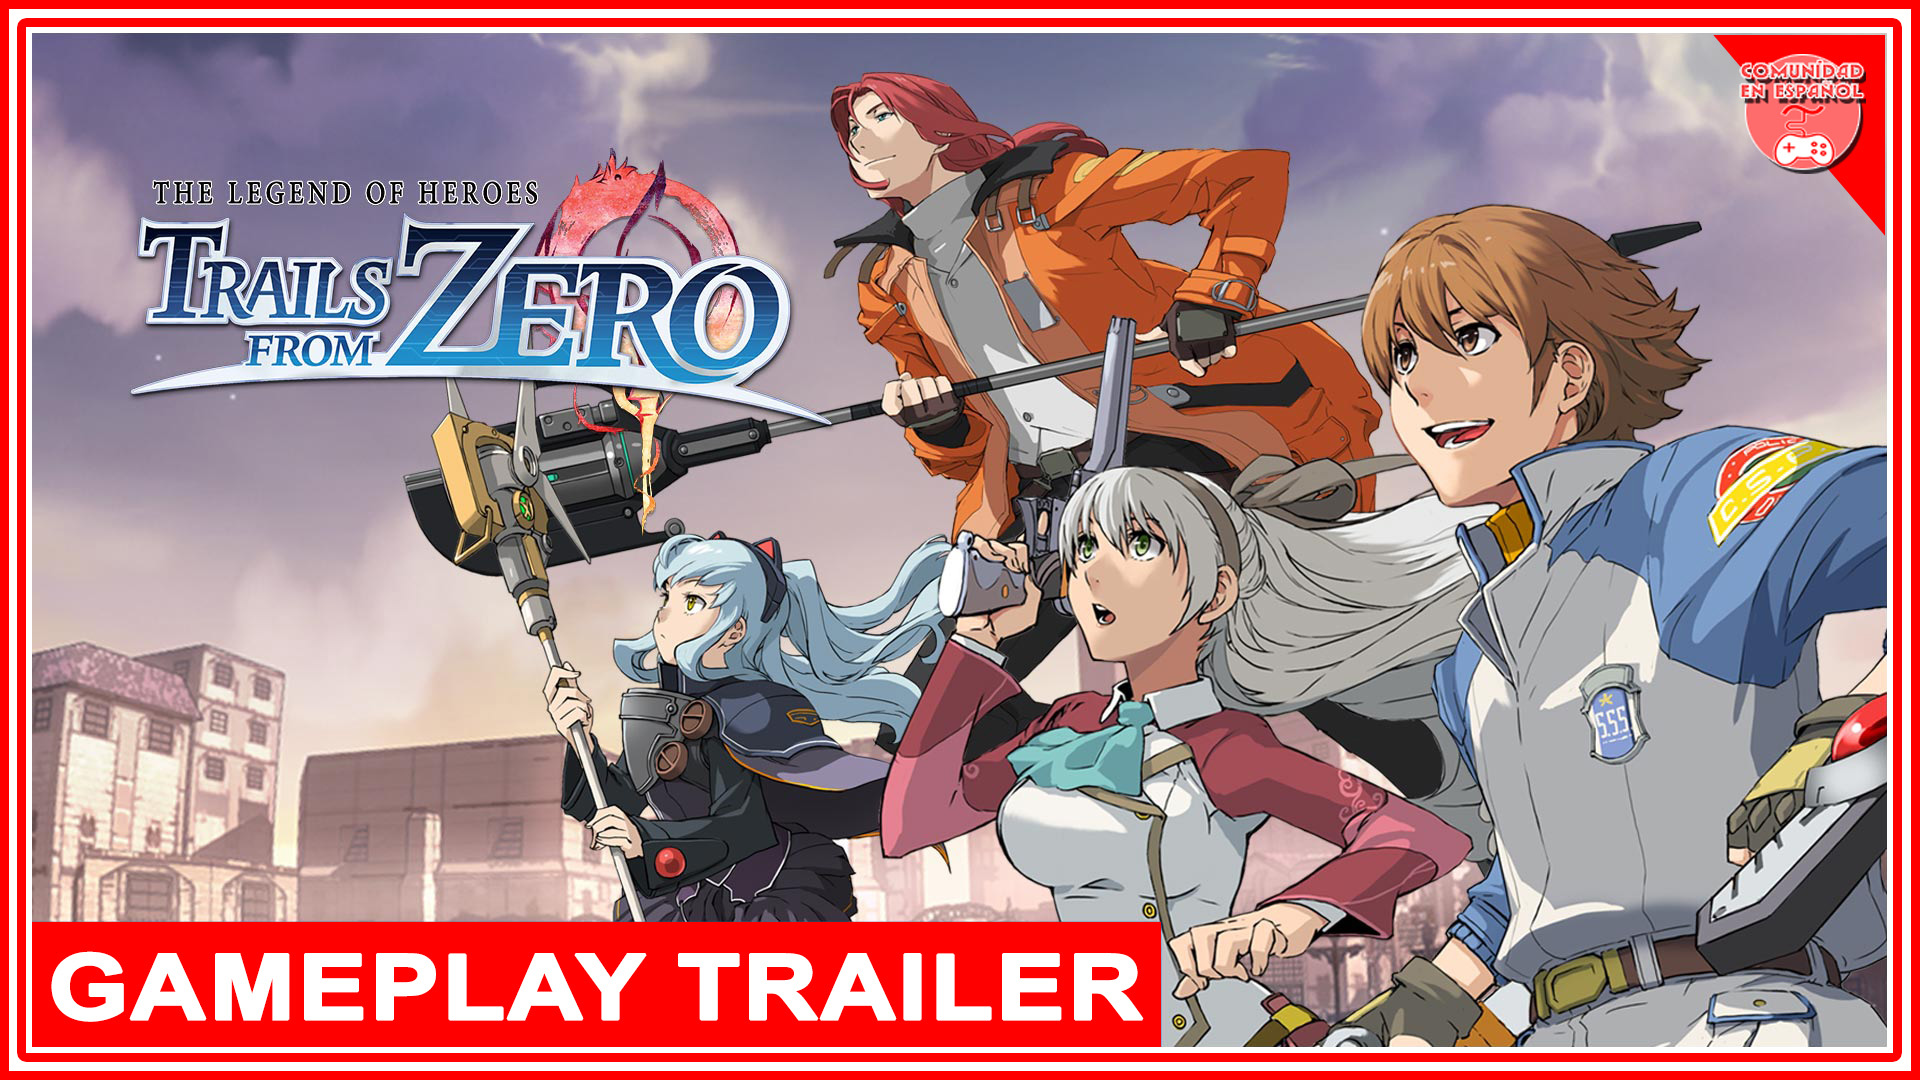 The Legend of Heroes: Trails from Zero